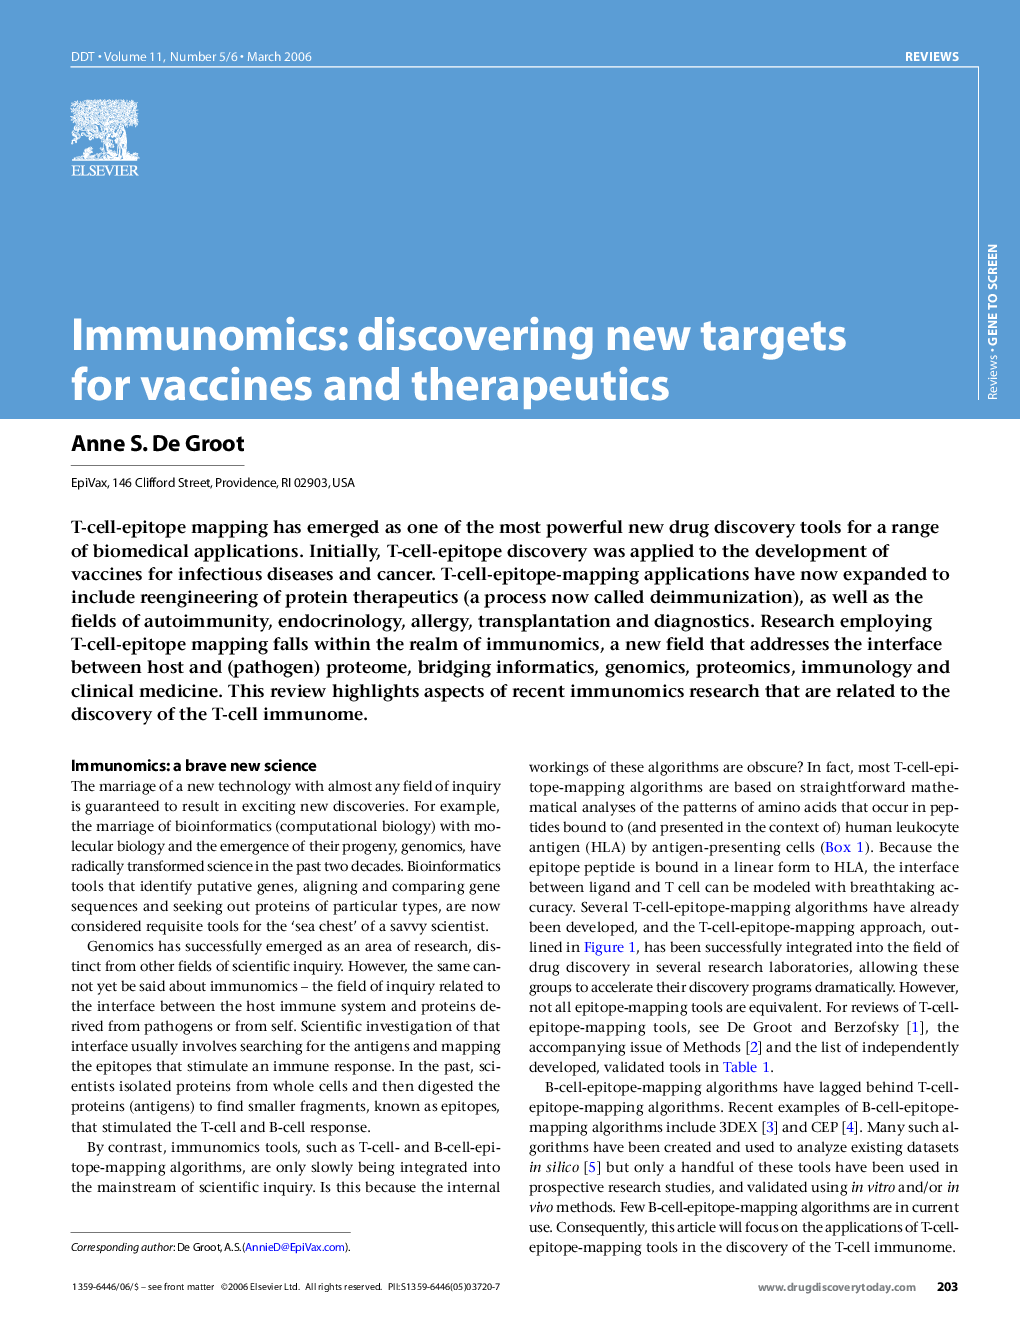 Immunomics: discovering new targets for vaccines and therapeutics